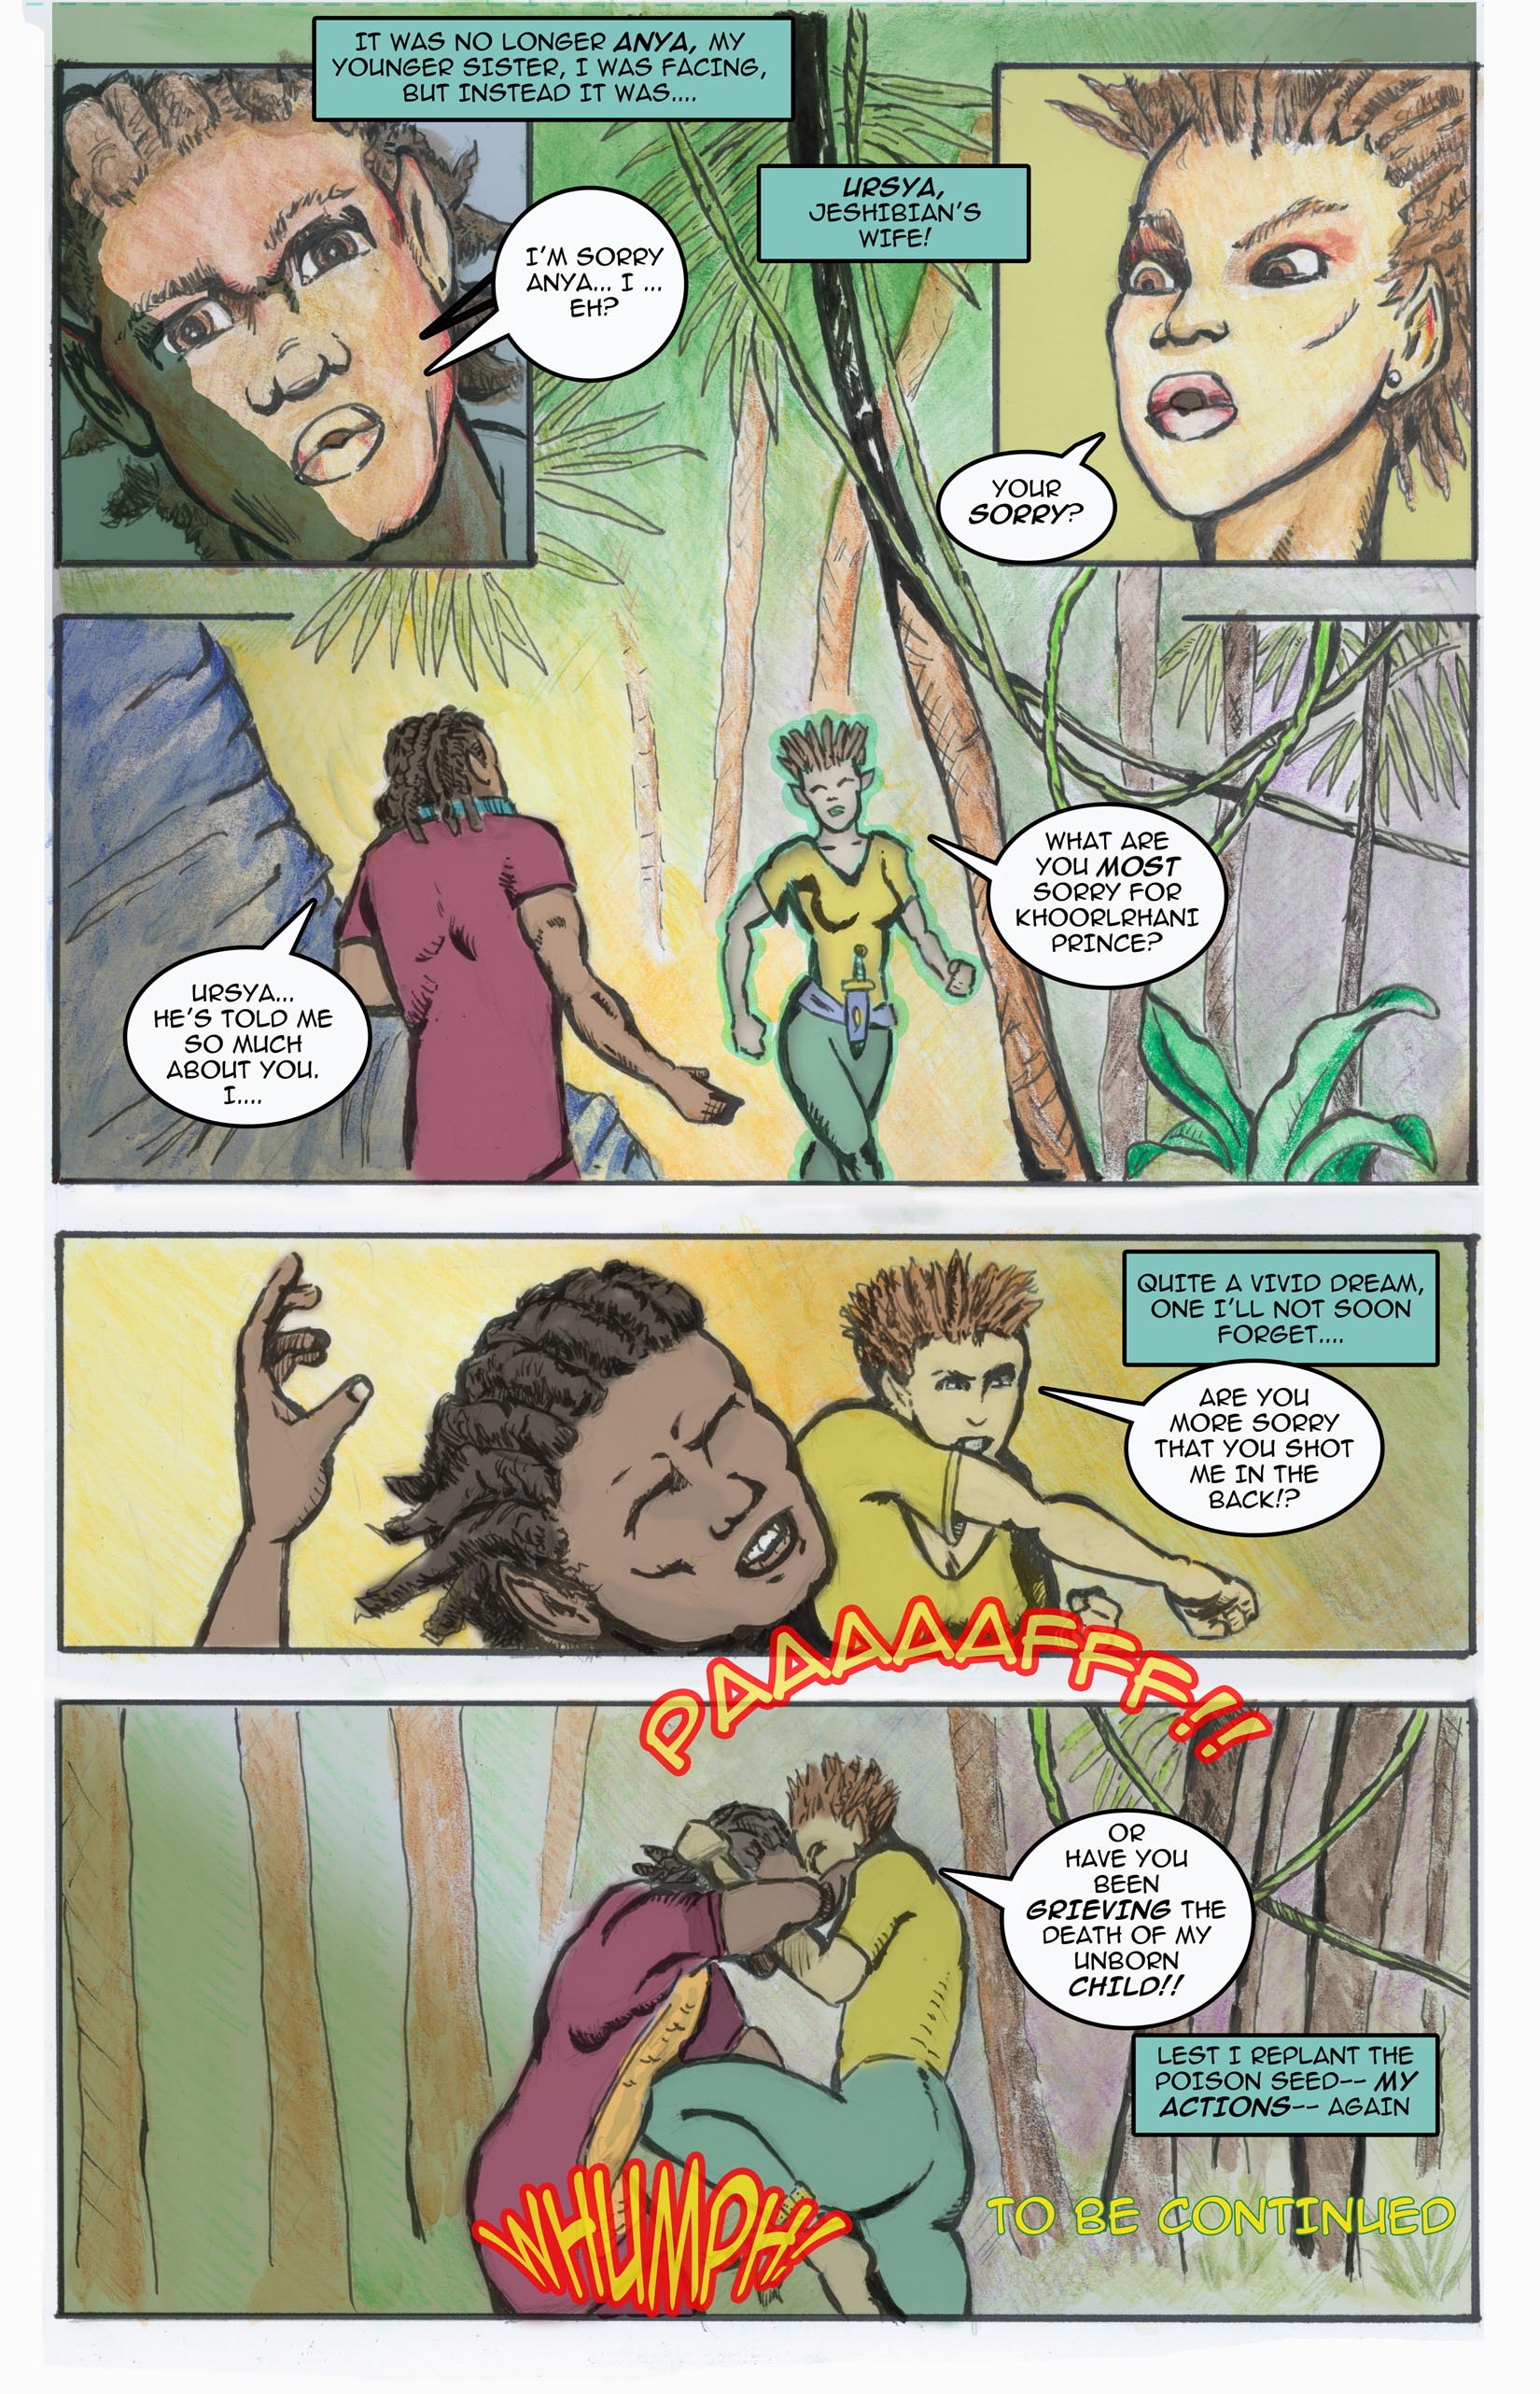 Dreamers of The Great One Land (page 34)